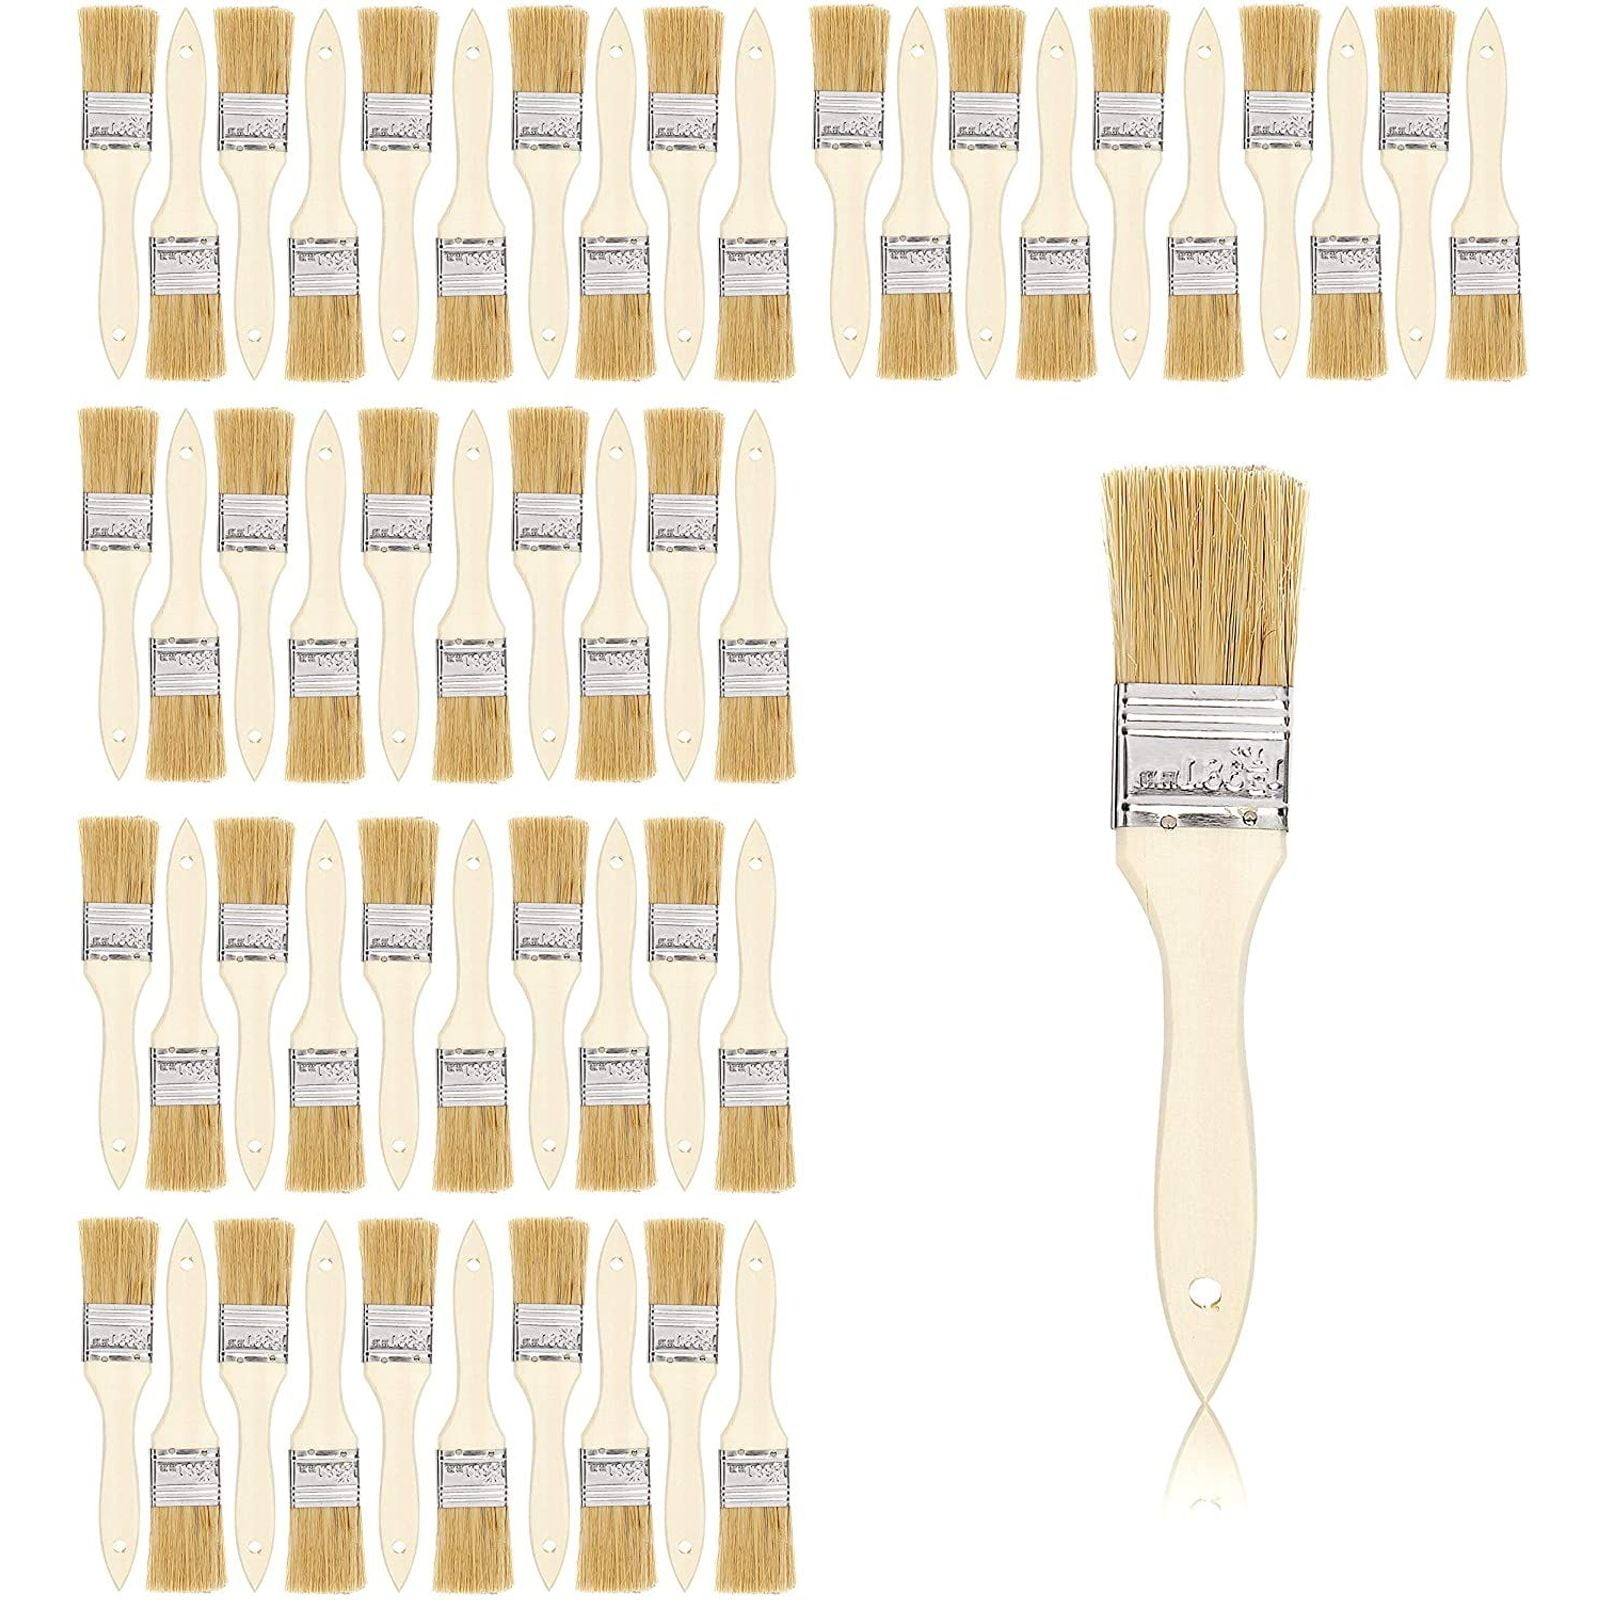 36 Chip Brush Brushes Perfect Adhesives Paint Touchups Sizes 0.5" 1" 1.5" 2" 3" 